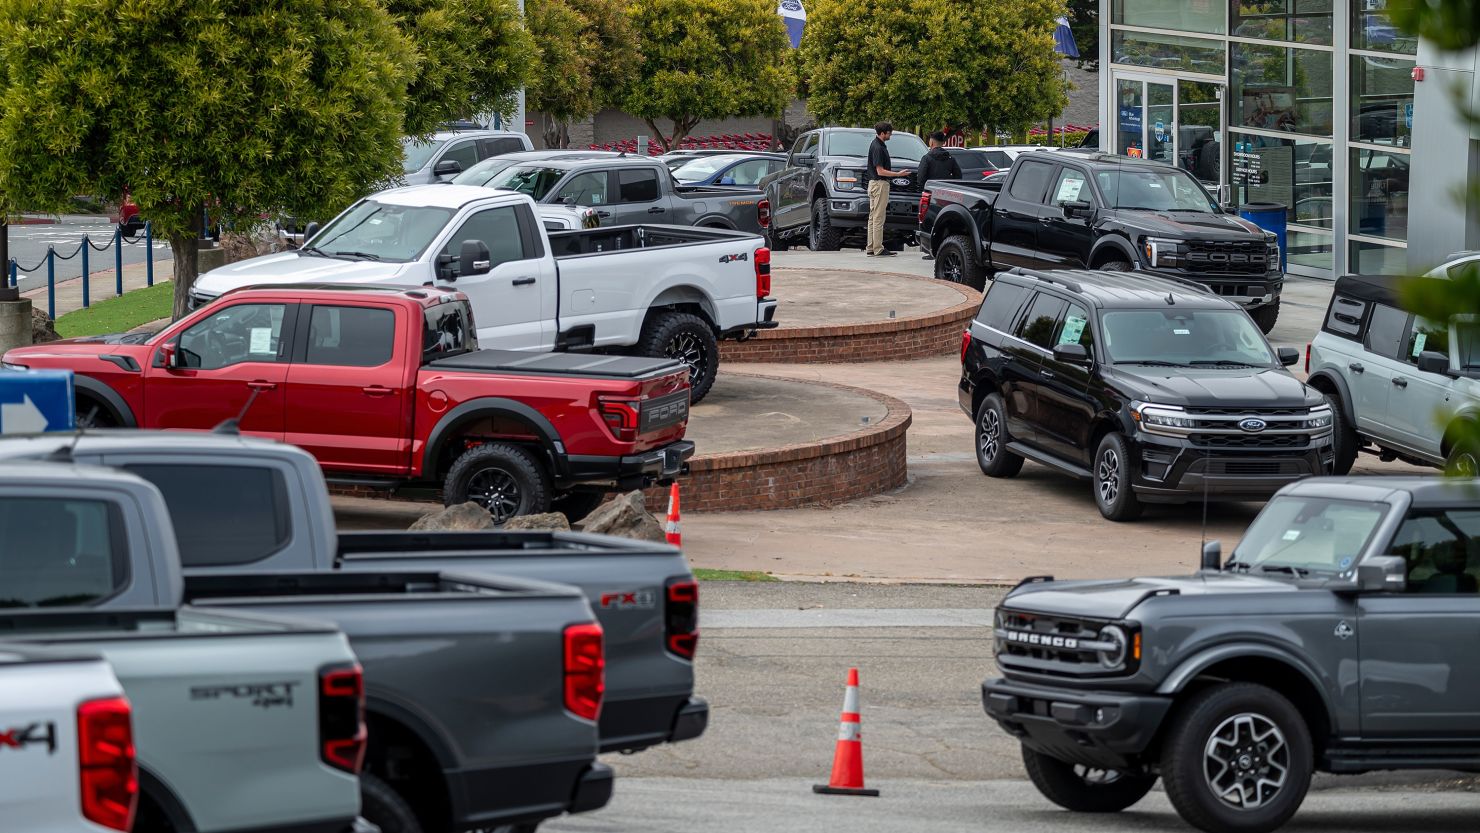 New Ford vehicles for sale at a dealership in Colma, California, as CDK Global, a software provider to some 15,000 car dealers, was waylaid by debilitating cyberattacks.